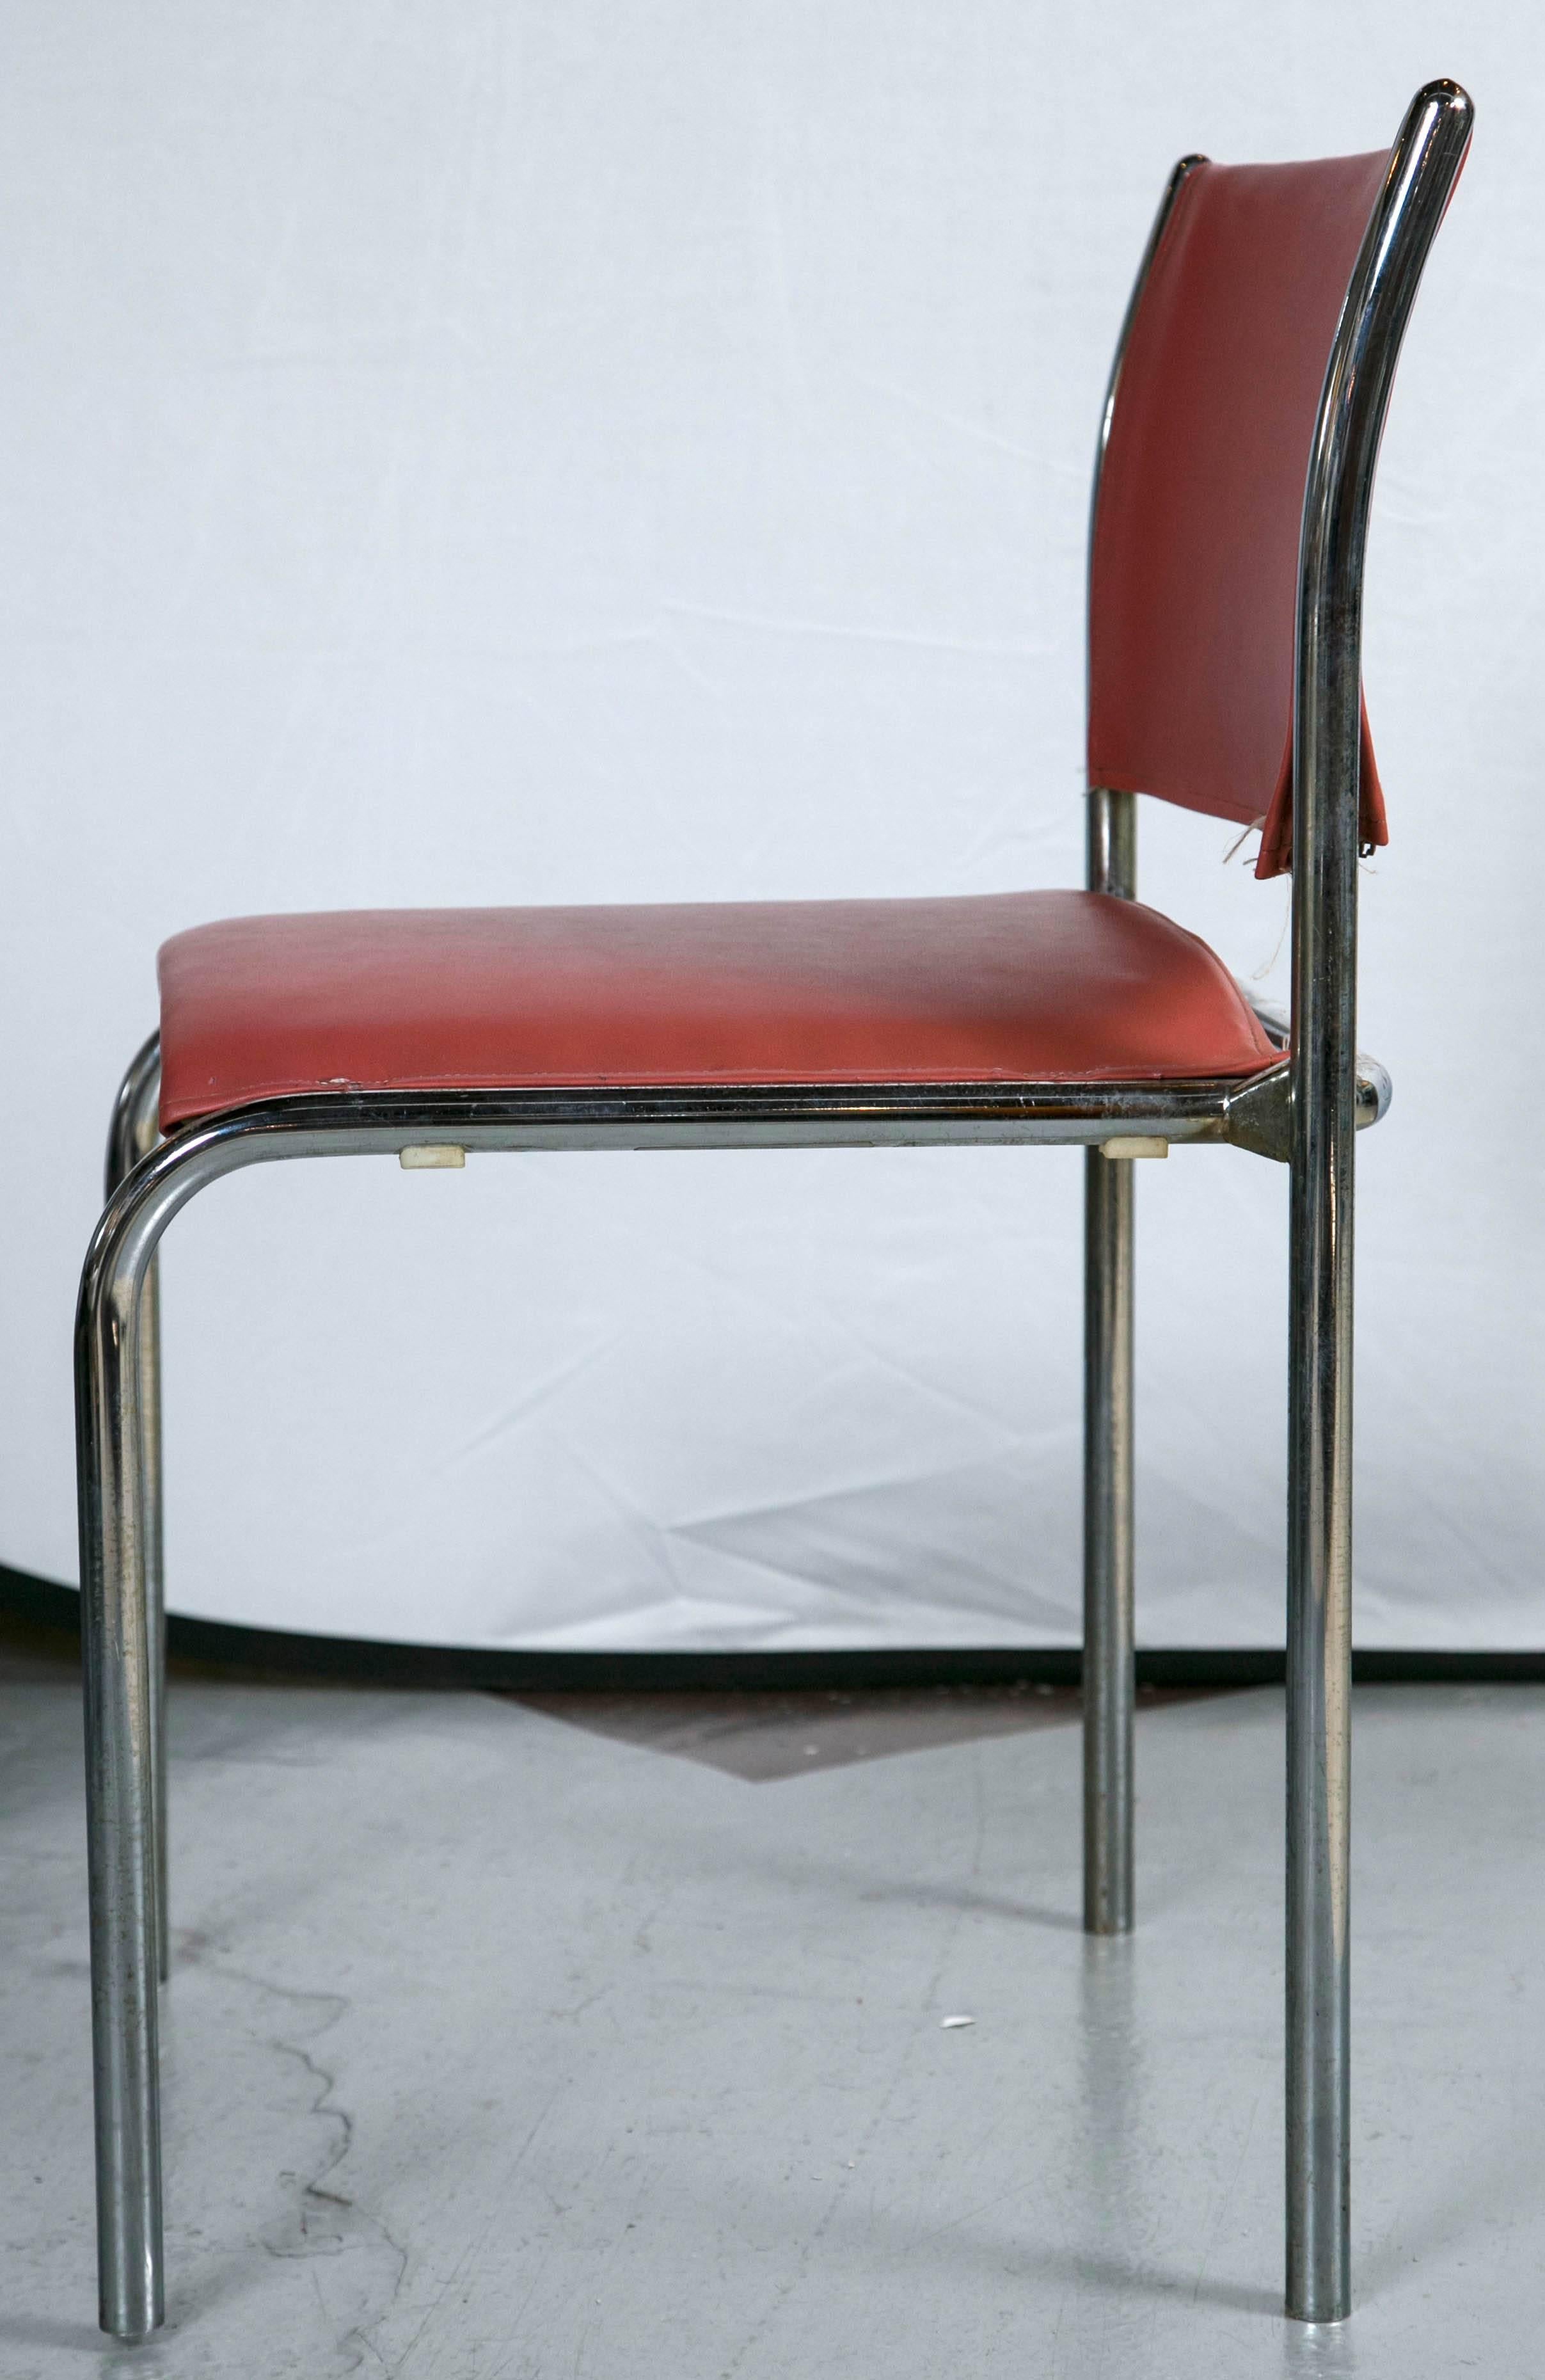 Late 20th Century Set of Ten Thonet Chrome and Leather Side Chairs Style of Mies van der Rohe